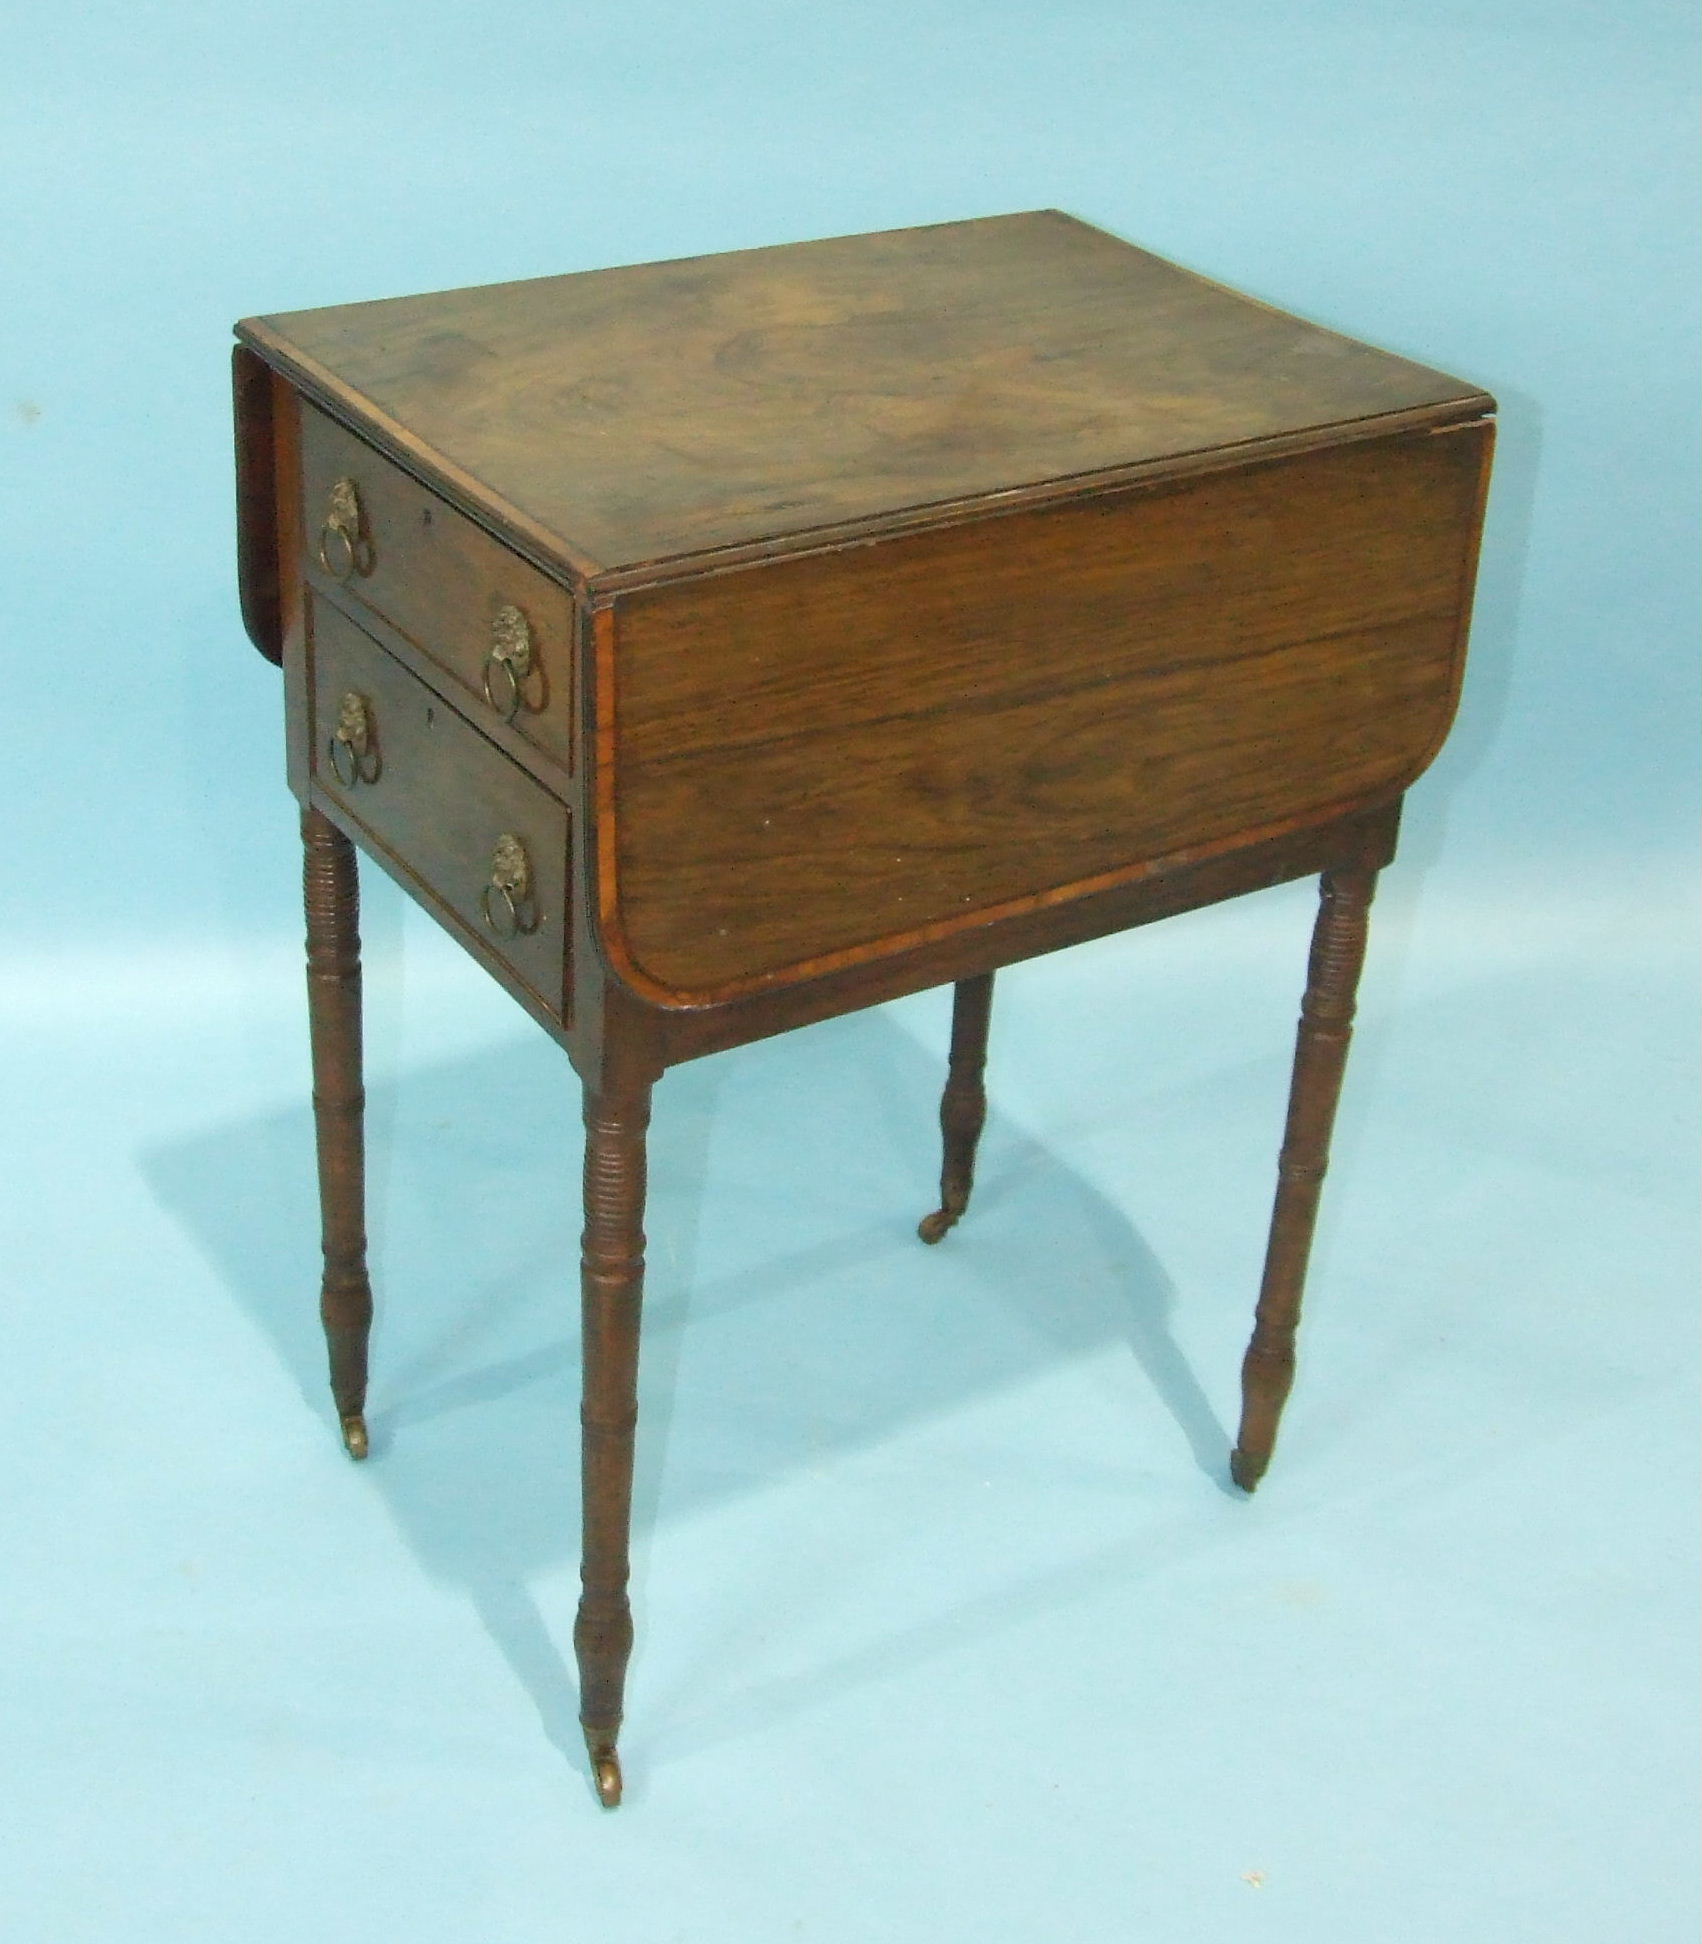 An early-19th century rosewood two-drawer work table, on turned legs with castors, (in need of